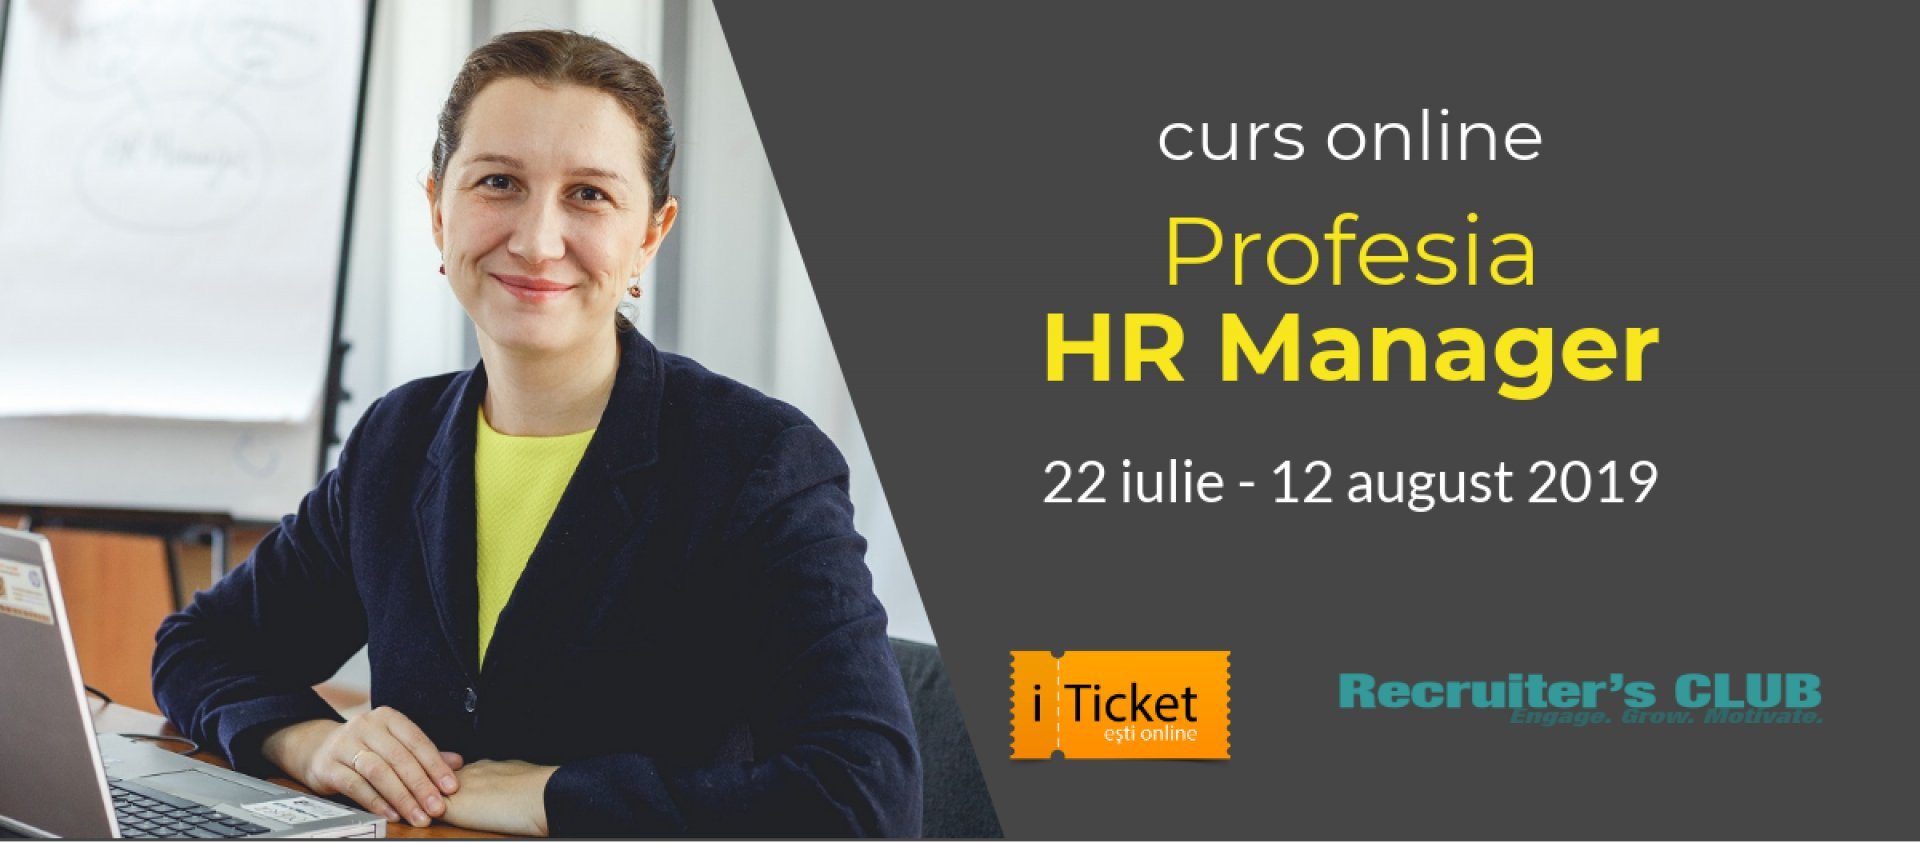 Curs Online: Profesia HR Manager